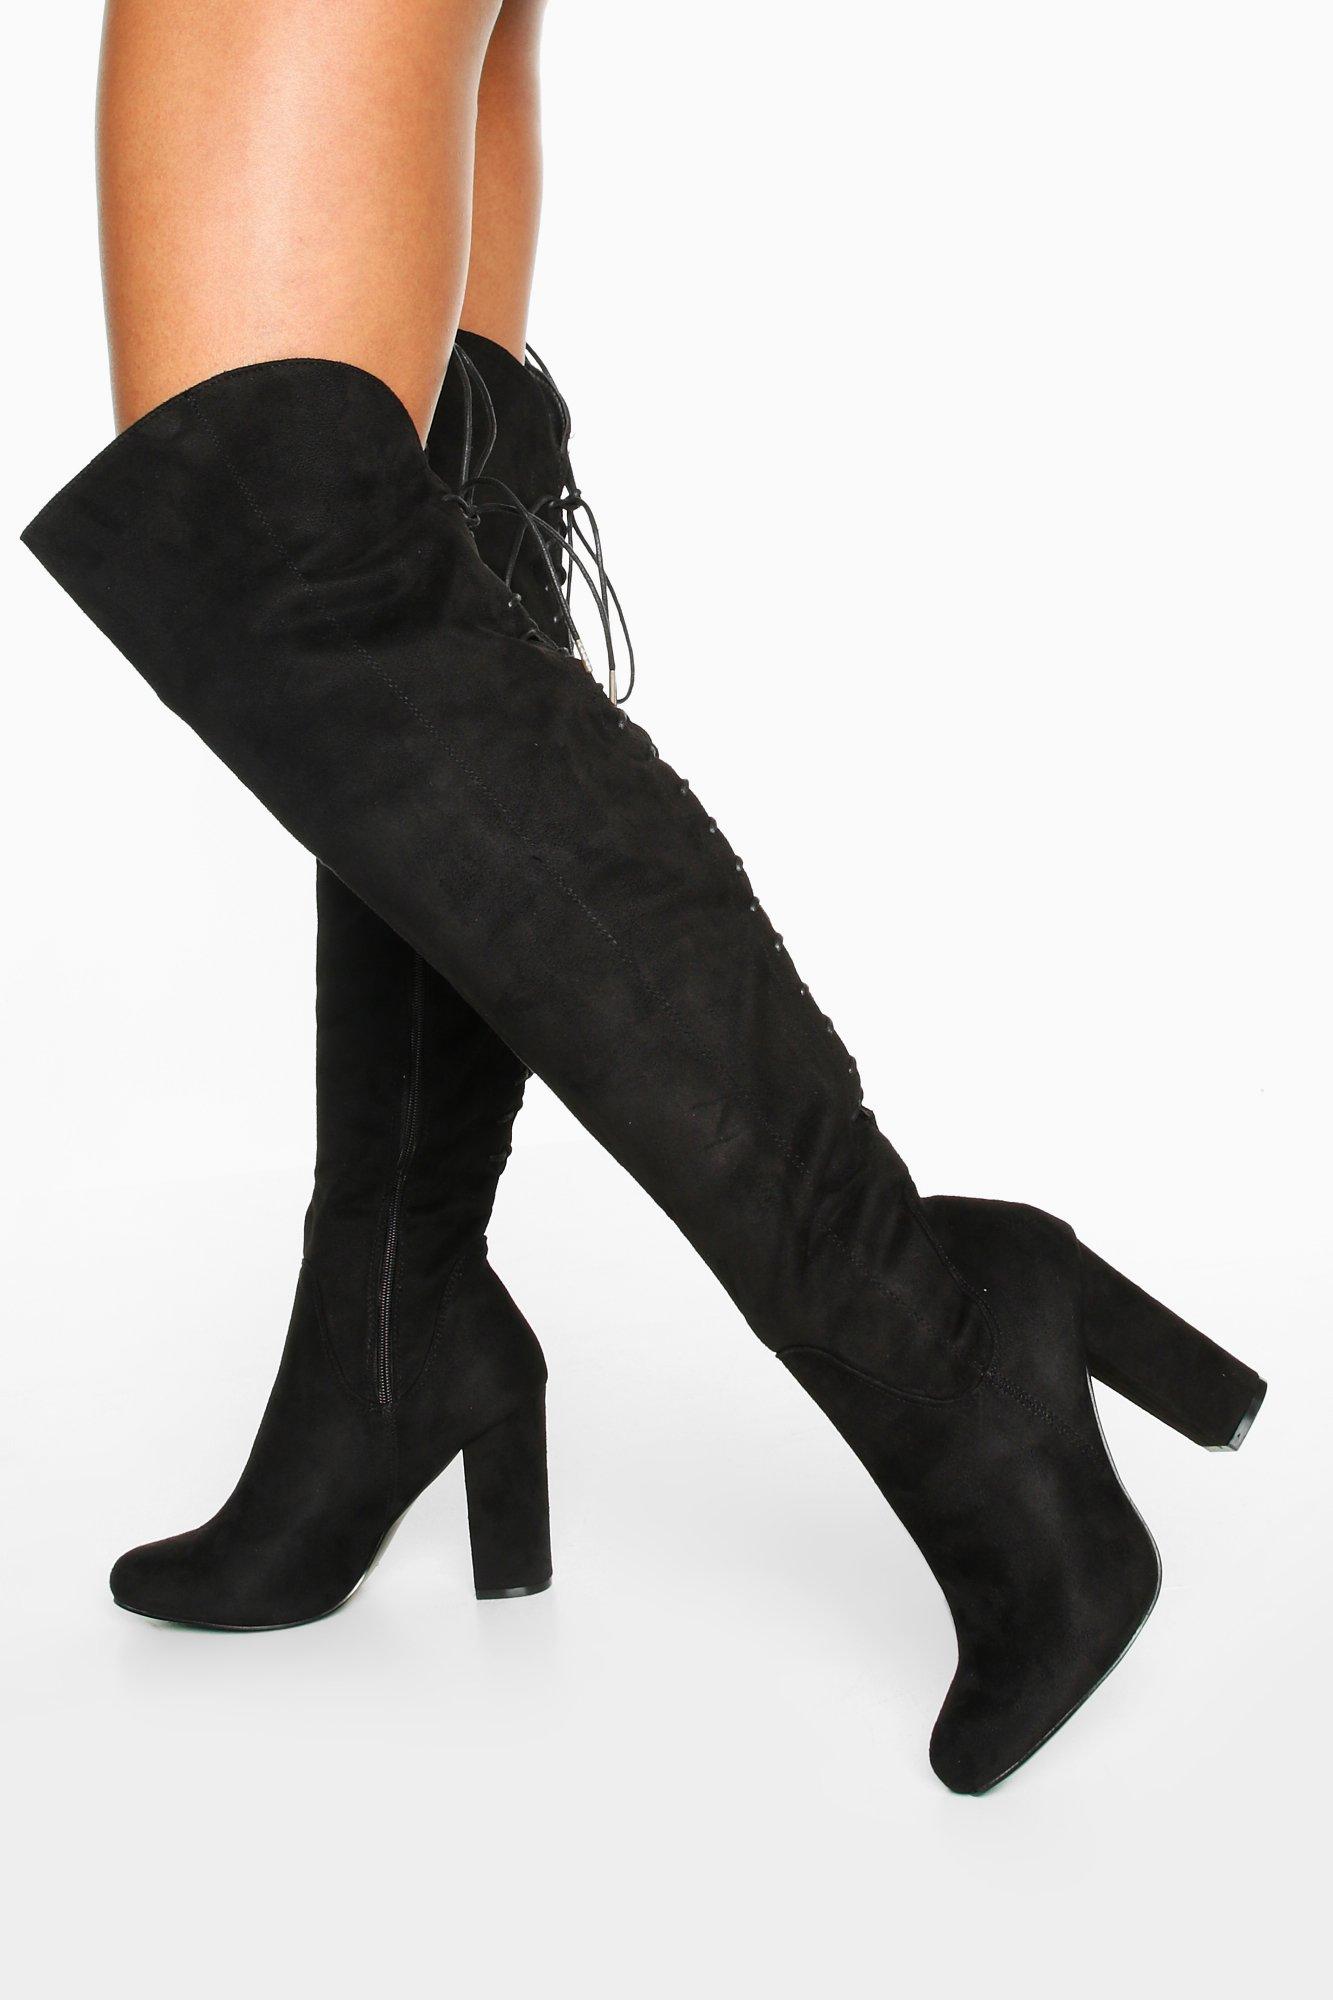 Boohoo Womens Lace Back Block Heel Over The Knee High Boots - Black - 3